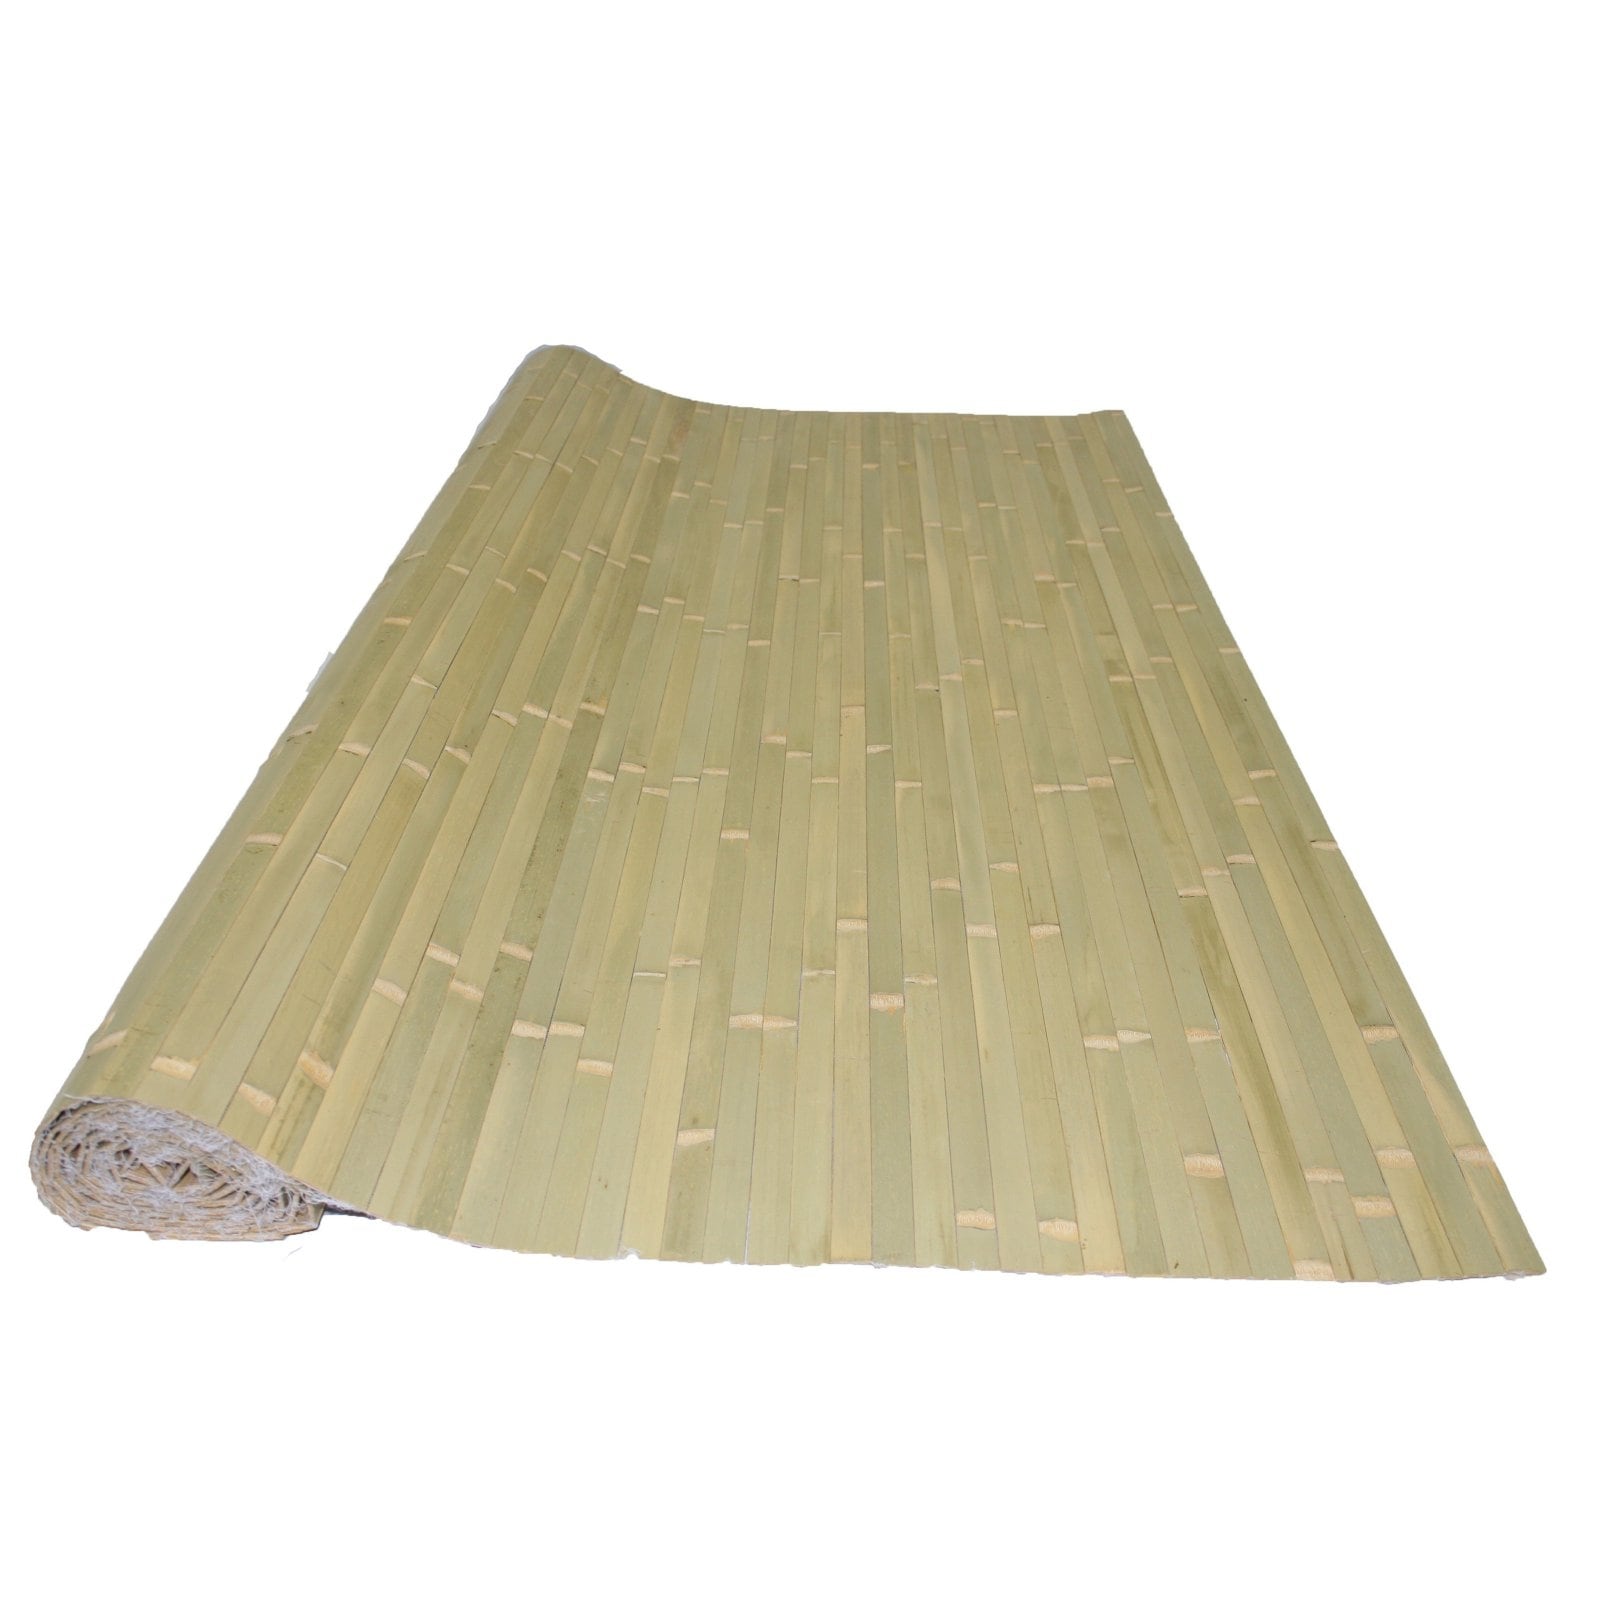 4 ft H x 8 ft L Bamboo Wall Panel Tortoise - N/A